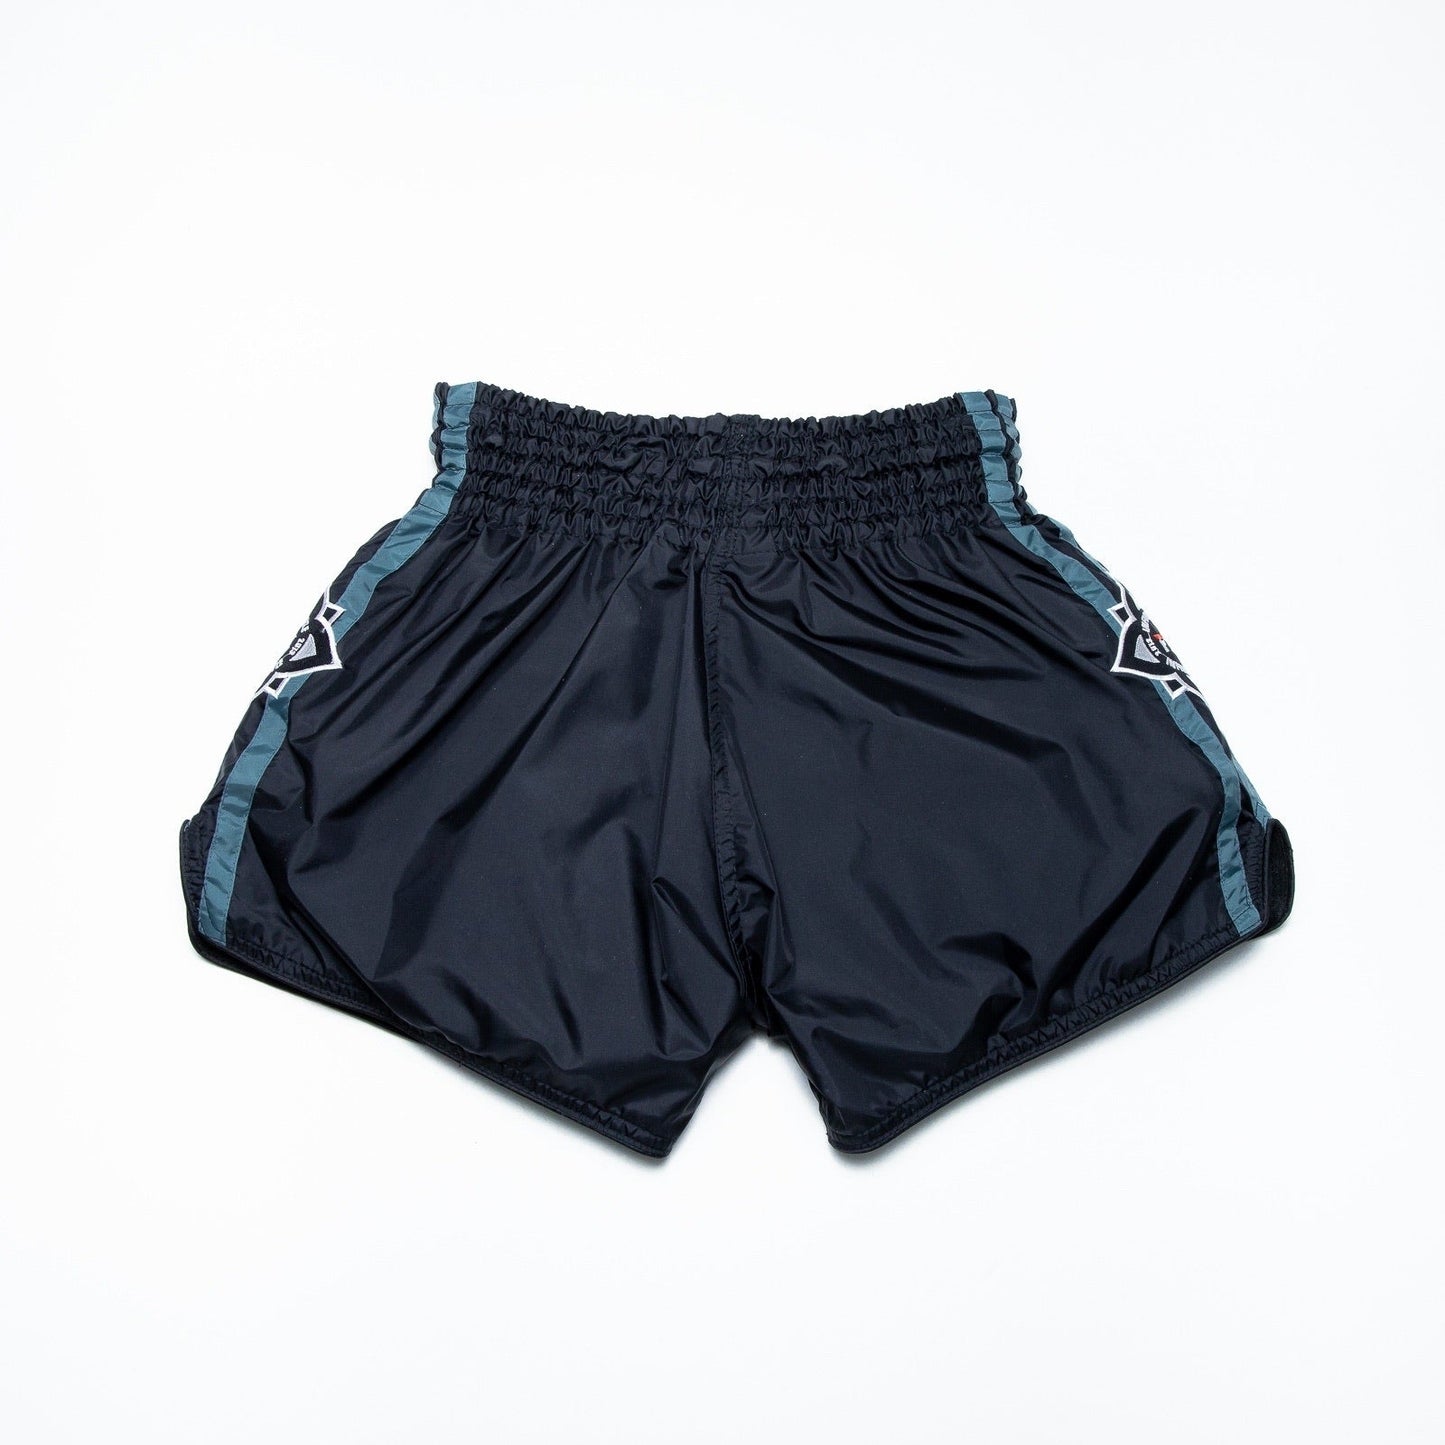 INFIGHTSTYLE SHORTS NYLON LOTUS COLLECTION